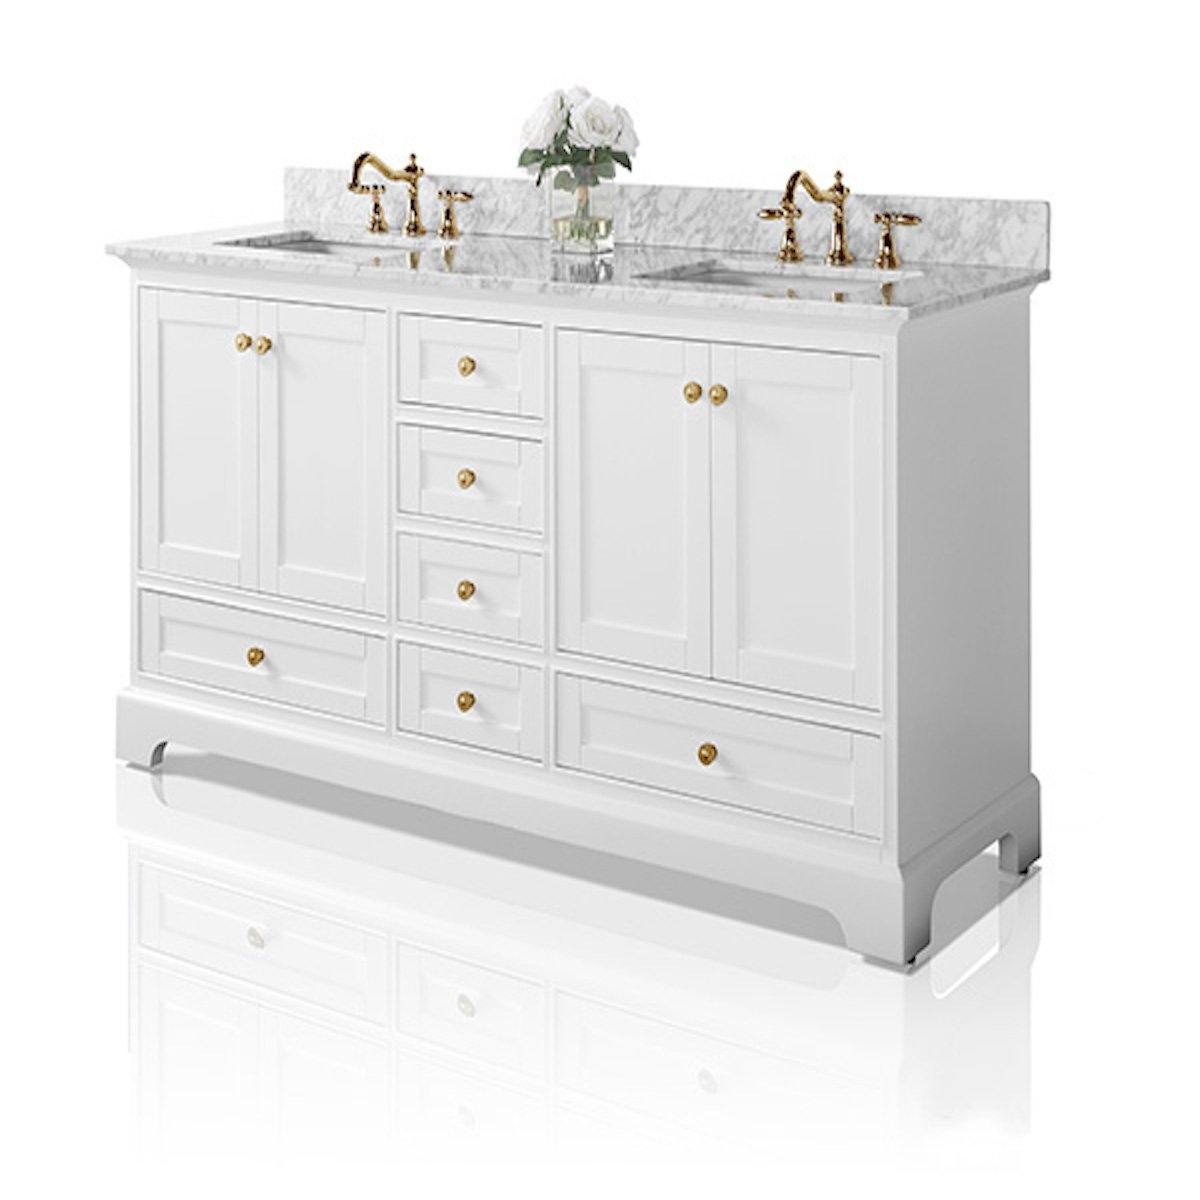 Ancerre Designs Audrey 72 Inch White Double Vanity Side